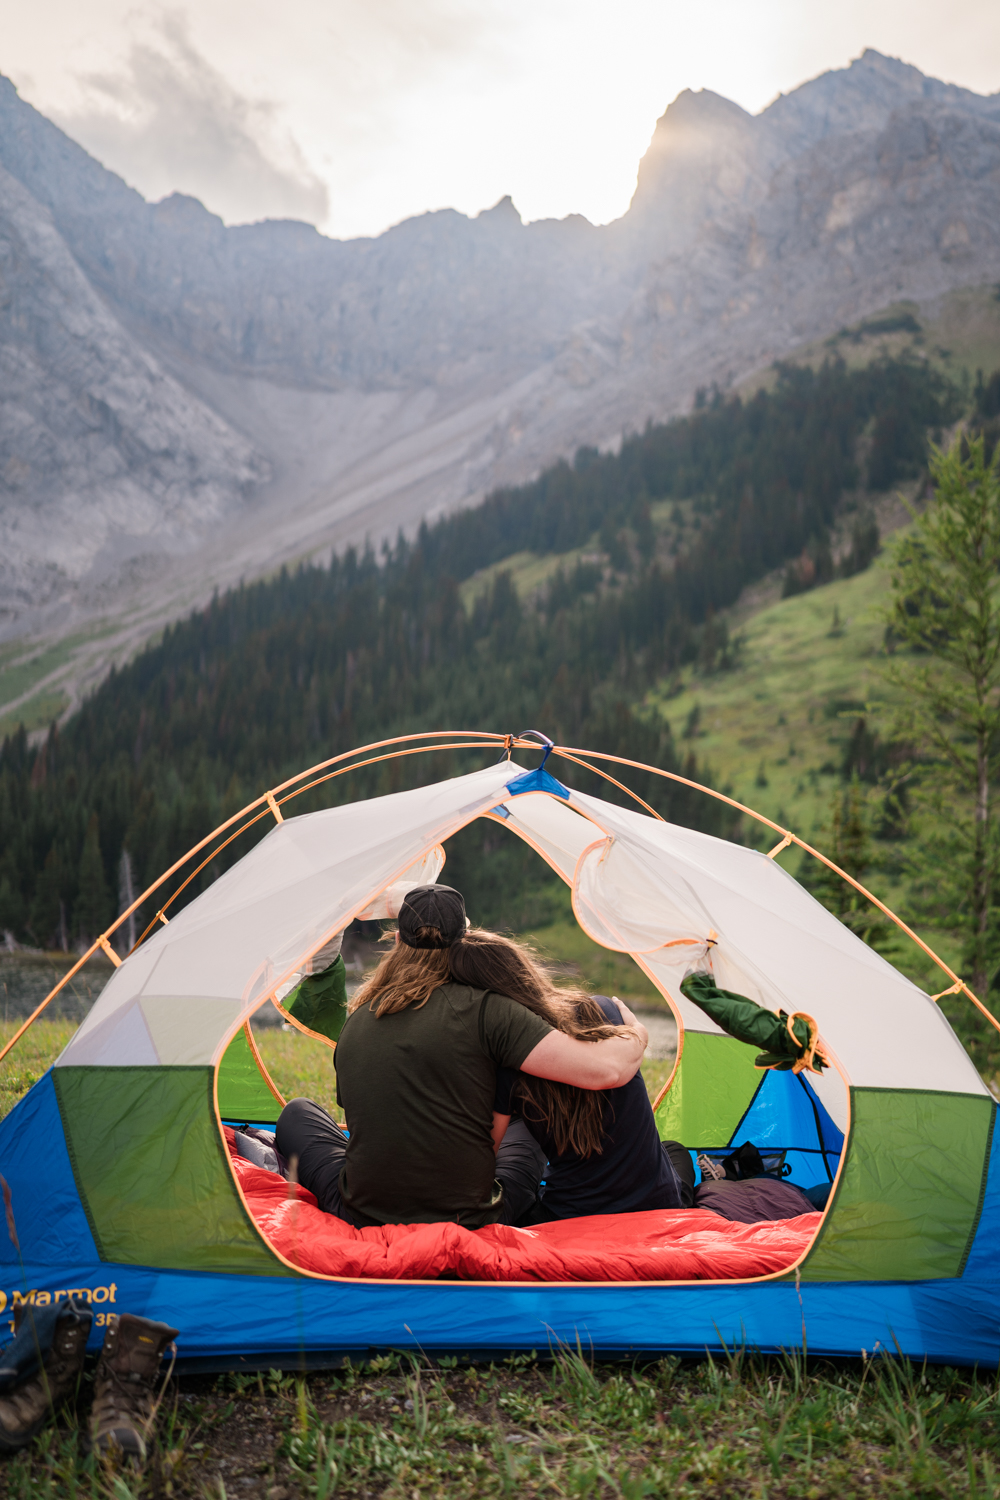 A romantic couples portrait amidst the untouched wilderness of a Kananaskis backcountry camping elopement.